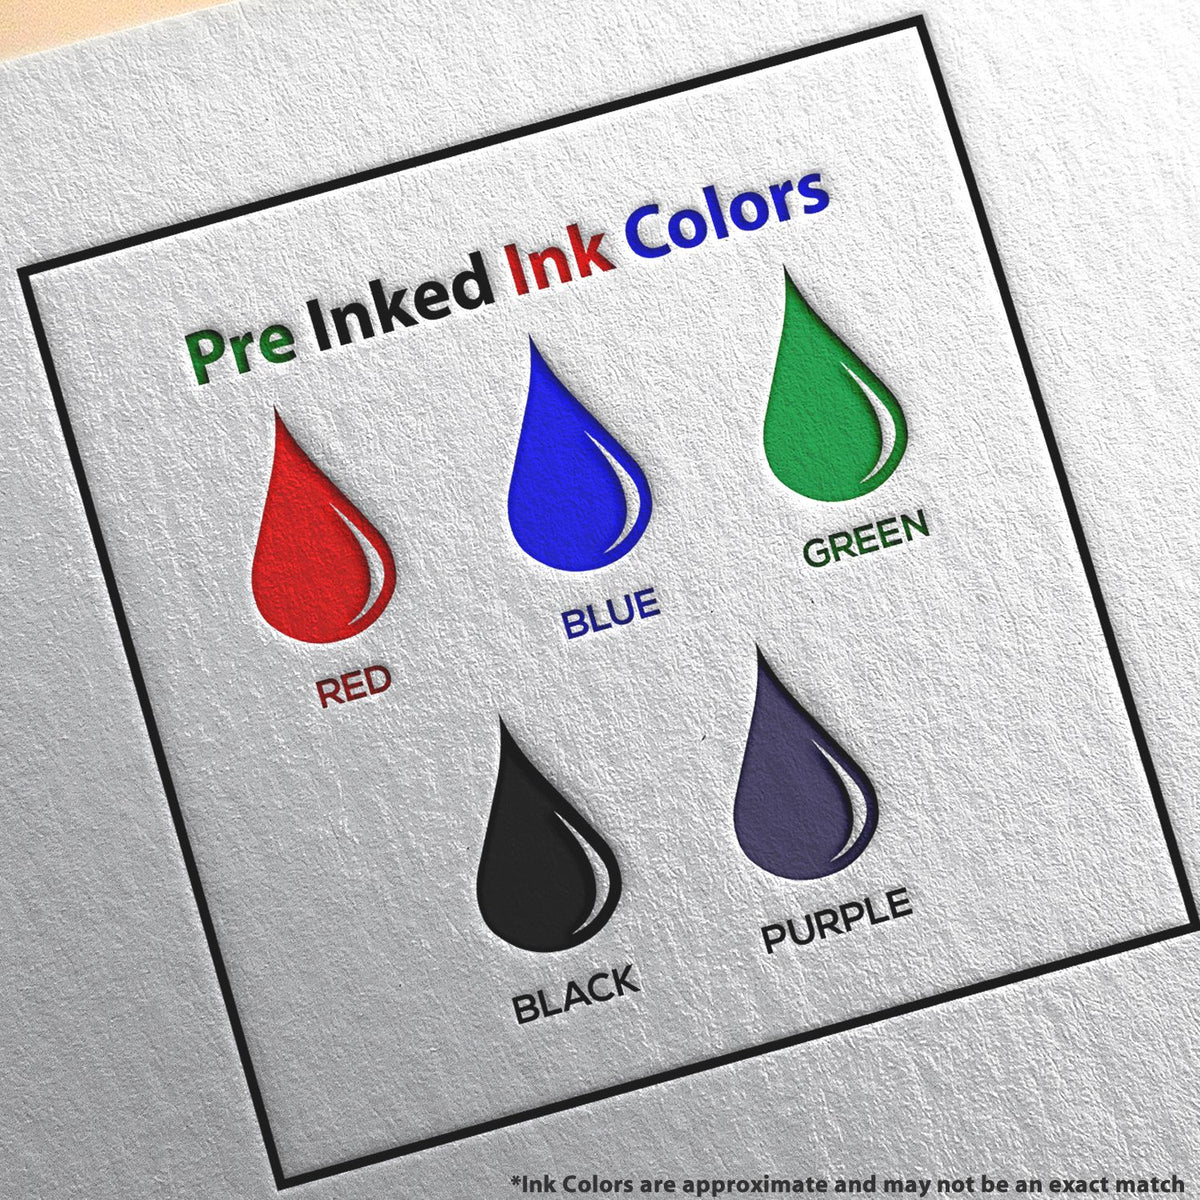 A picture showing the different ink colors or hues available for the Slim Pre-Inked Wisconsin Landscape Architect Seal Stamp product.